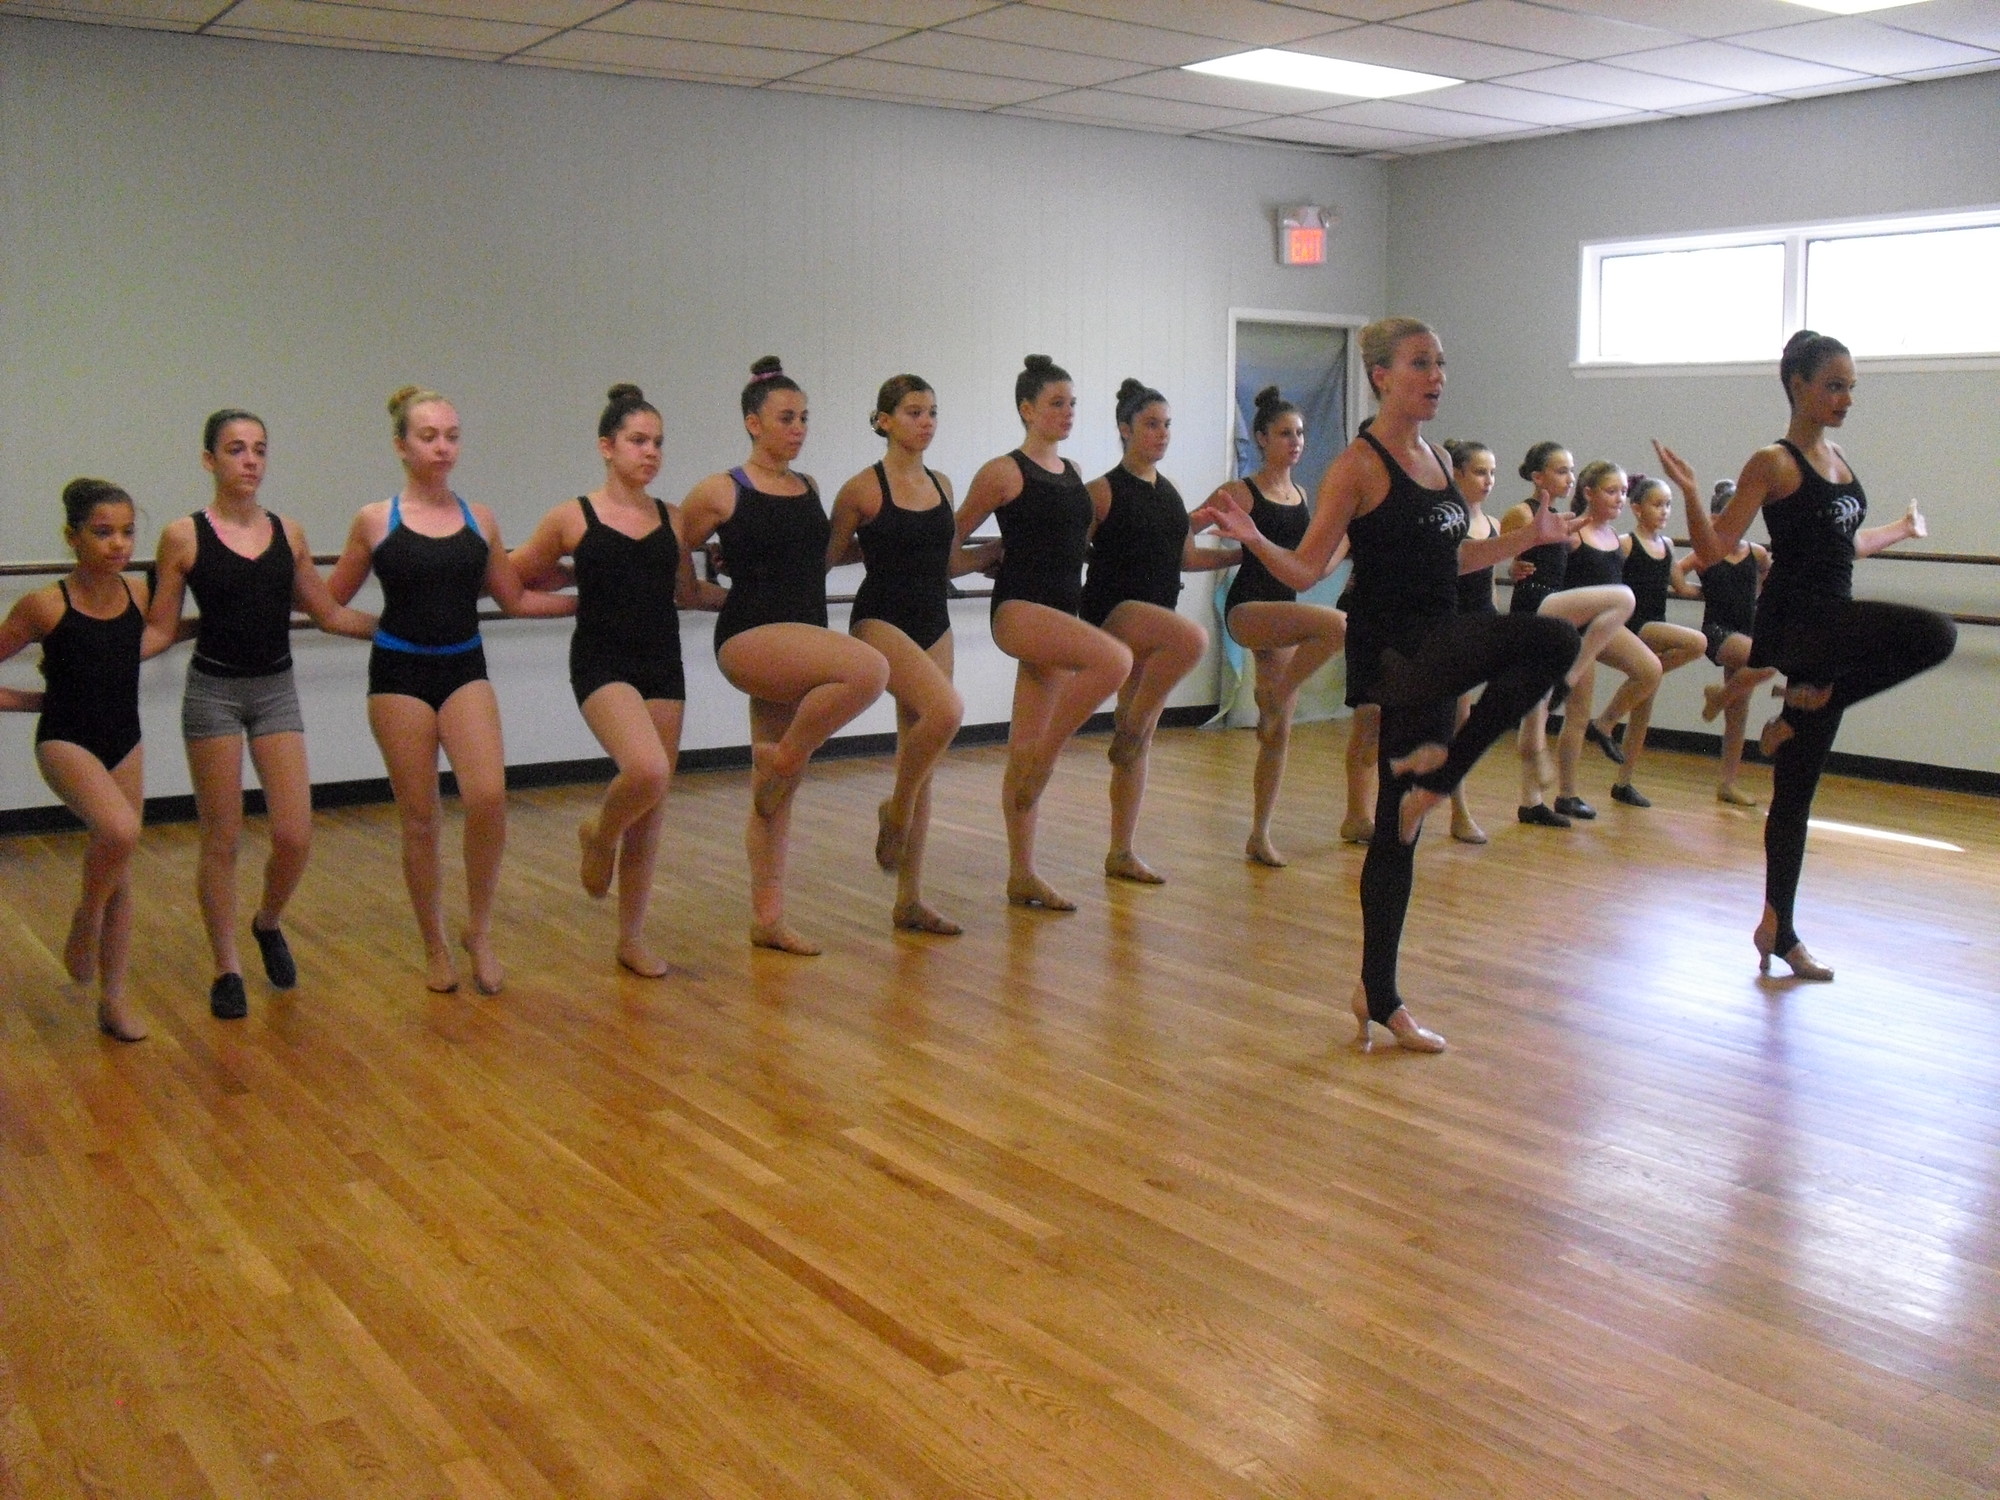 Dunleavy and Gavalas taught Oceanside Dance Center students the famous kickline.